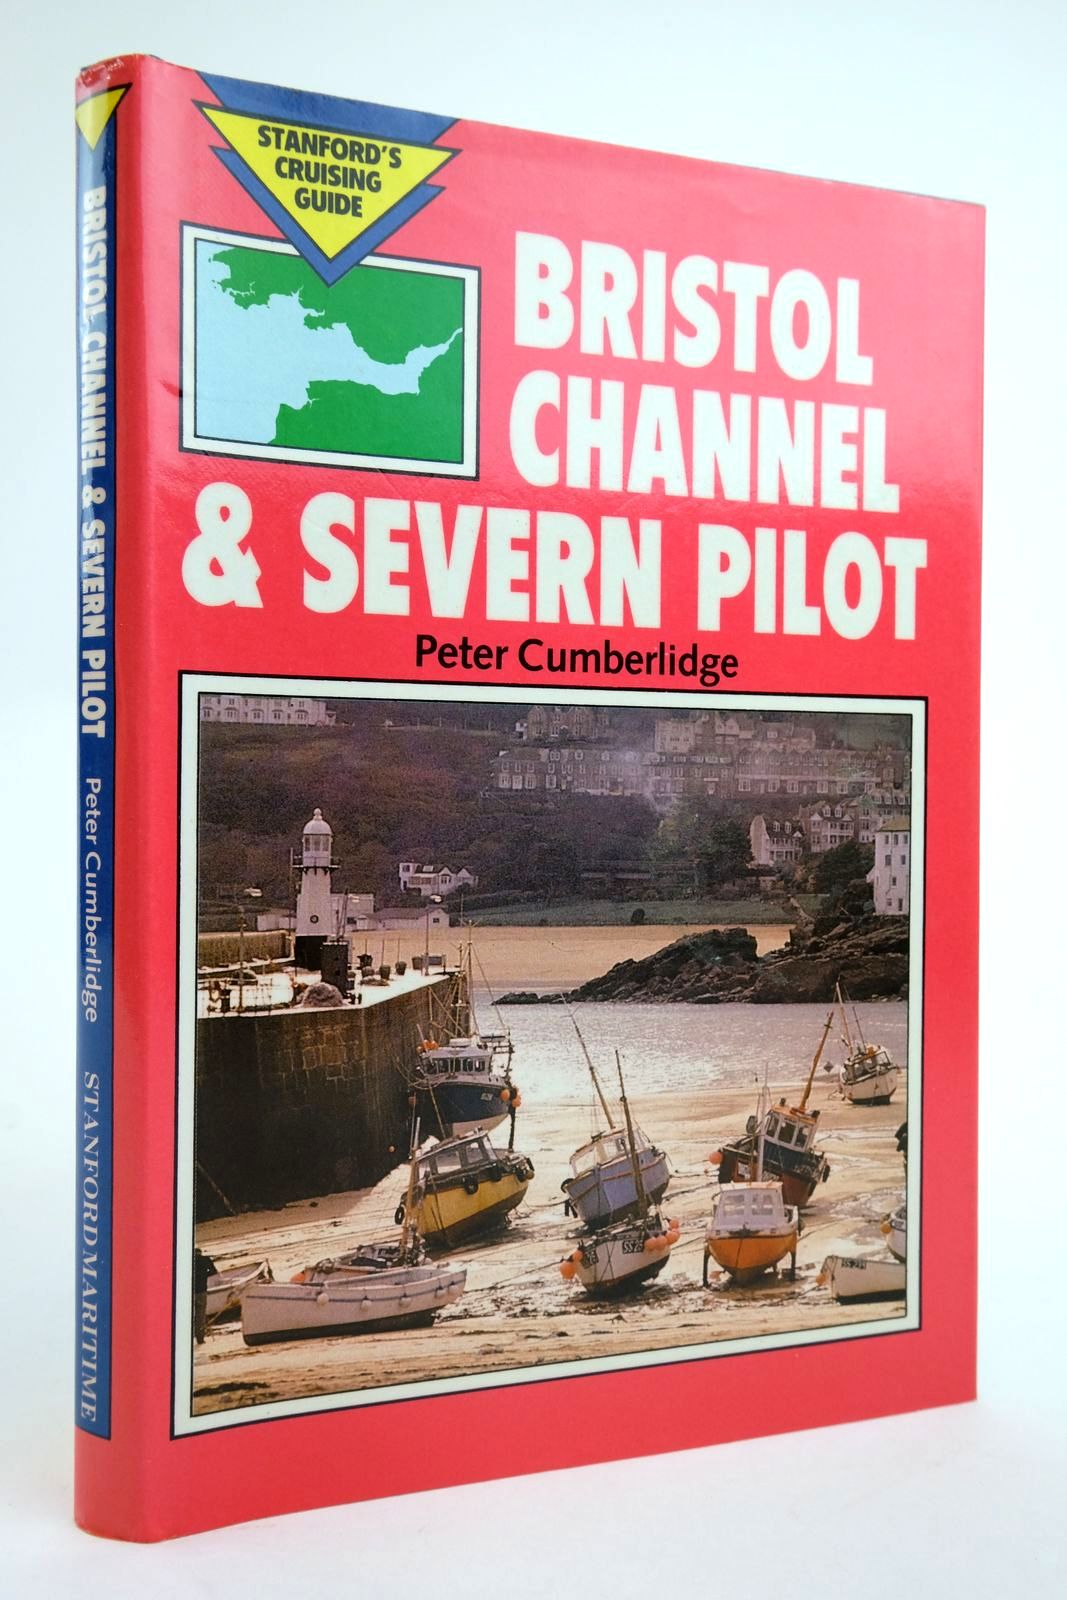 Photo of BRISTOL CHANNEL AND SEVERN PILOT written by Cumberlidge, Peter published by Stanford Maritime (STOCK CODE: 2135811)  for sale by Stella & Rose's Books